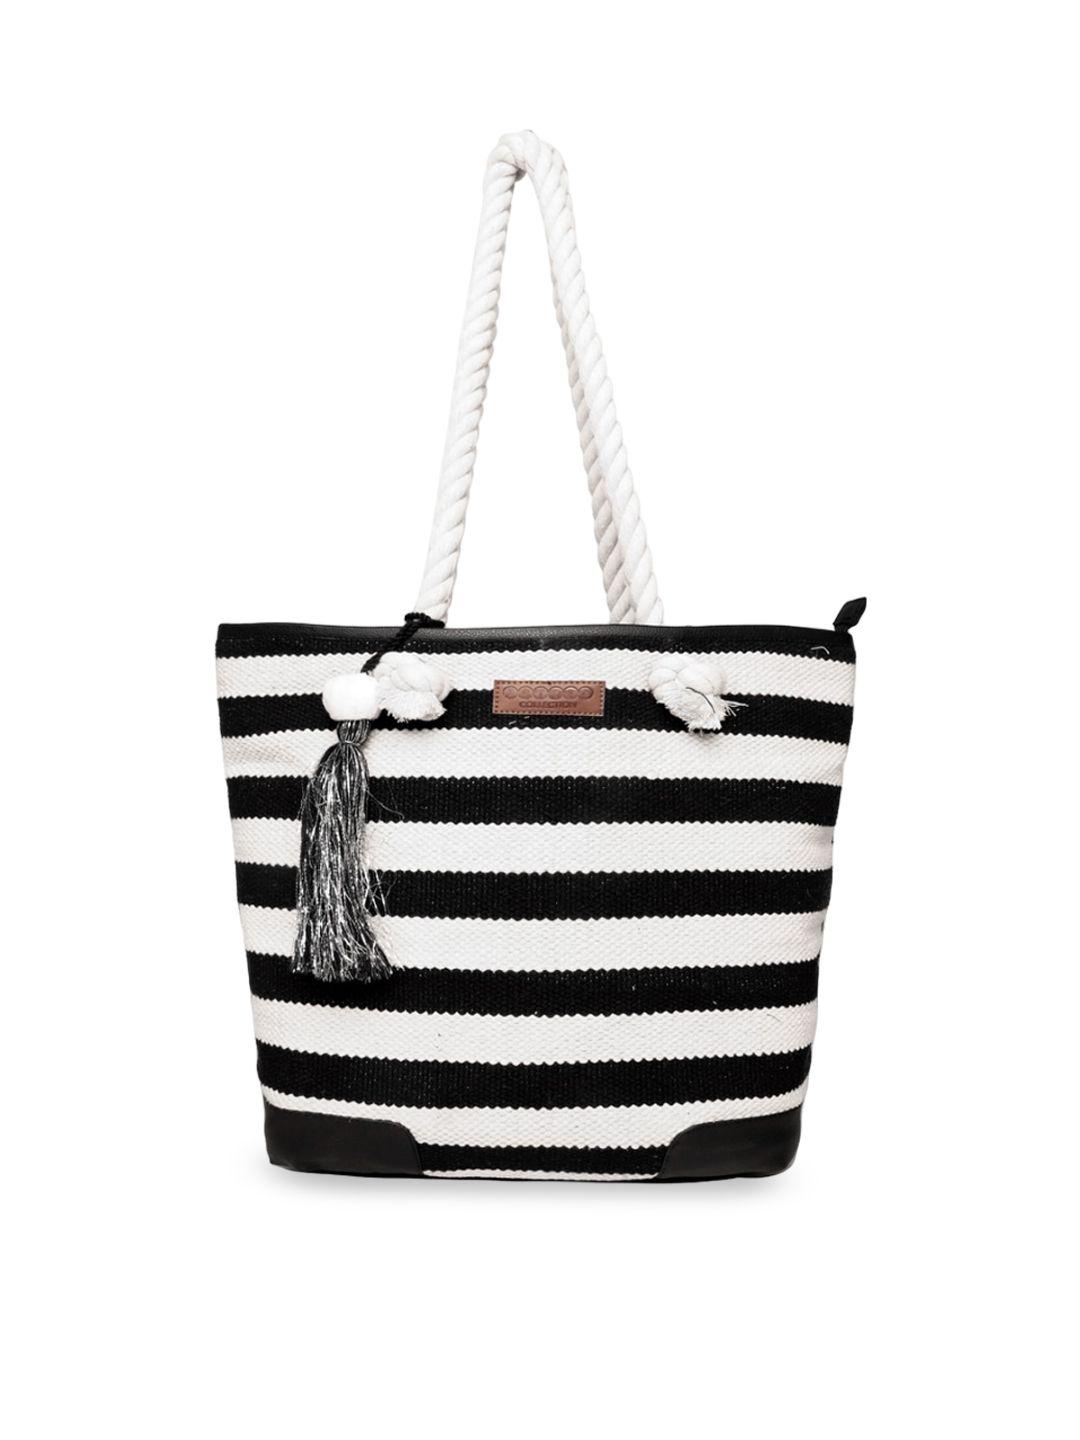 astrid blue striped oversized shopper tote bag with tasselled